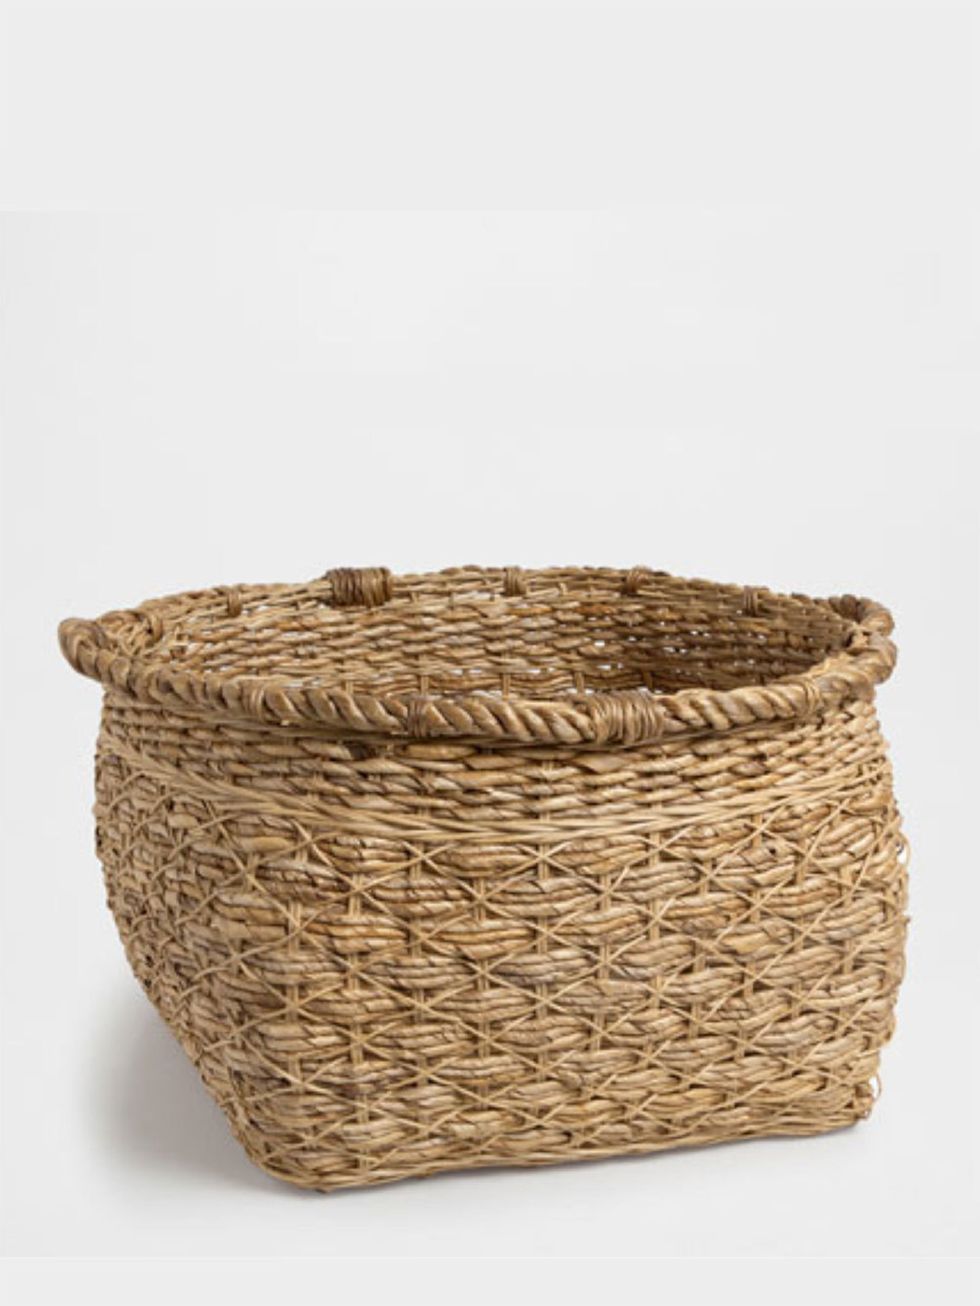 Basket, Storage basket, Wicker, Home accessories, Beige, Laundry basket, Straw, Natural material, Building material, Still life photography, 